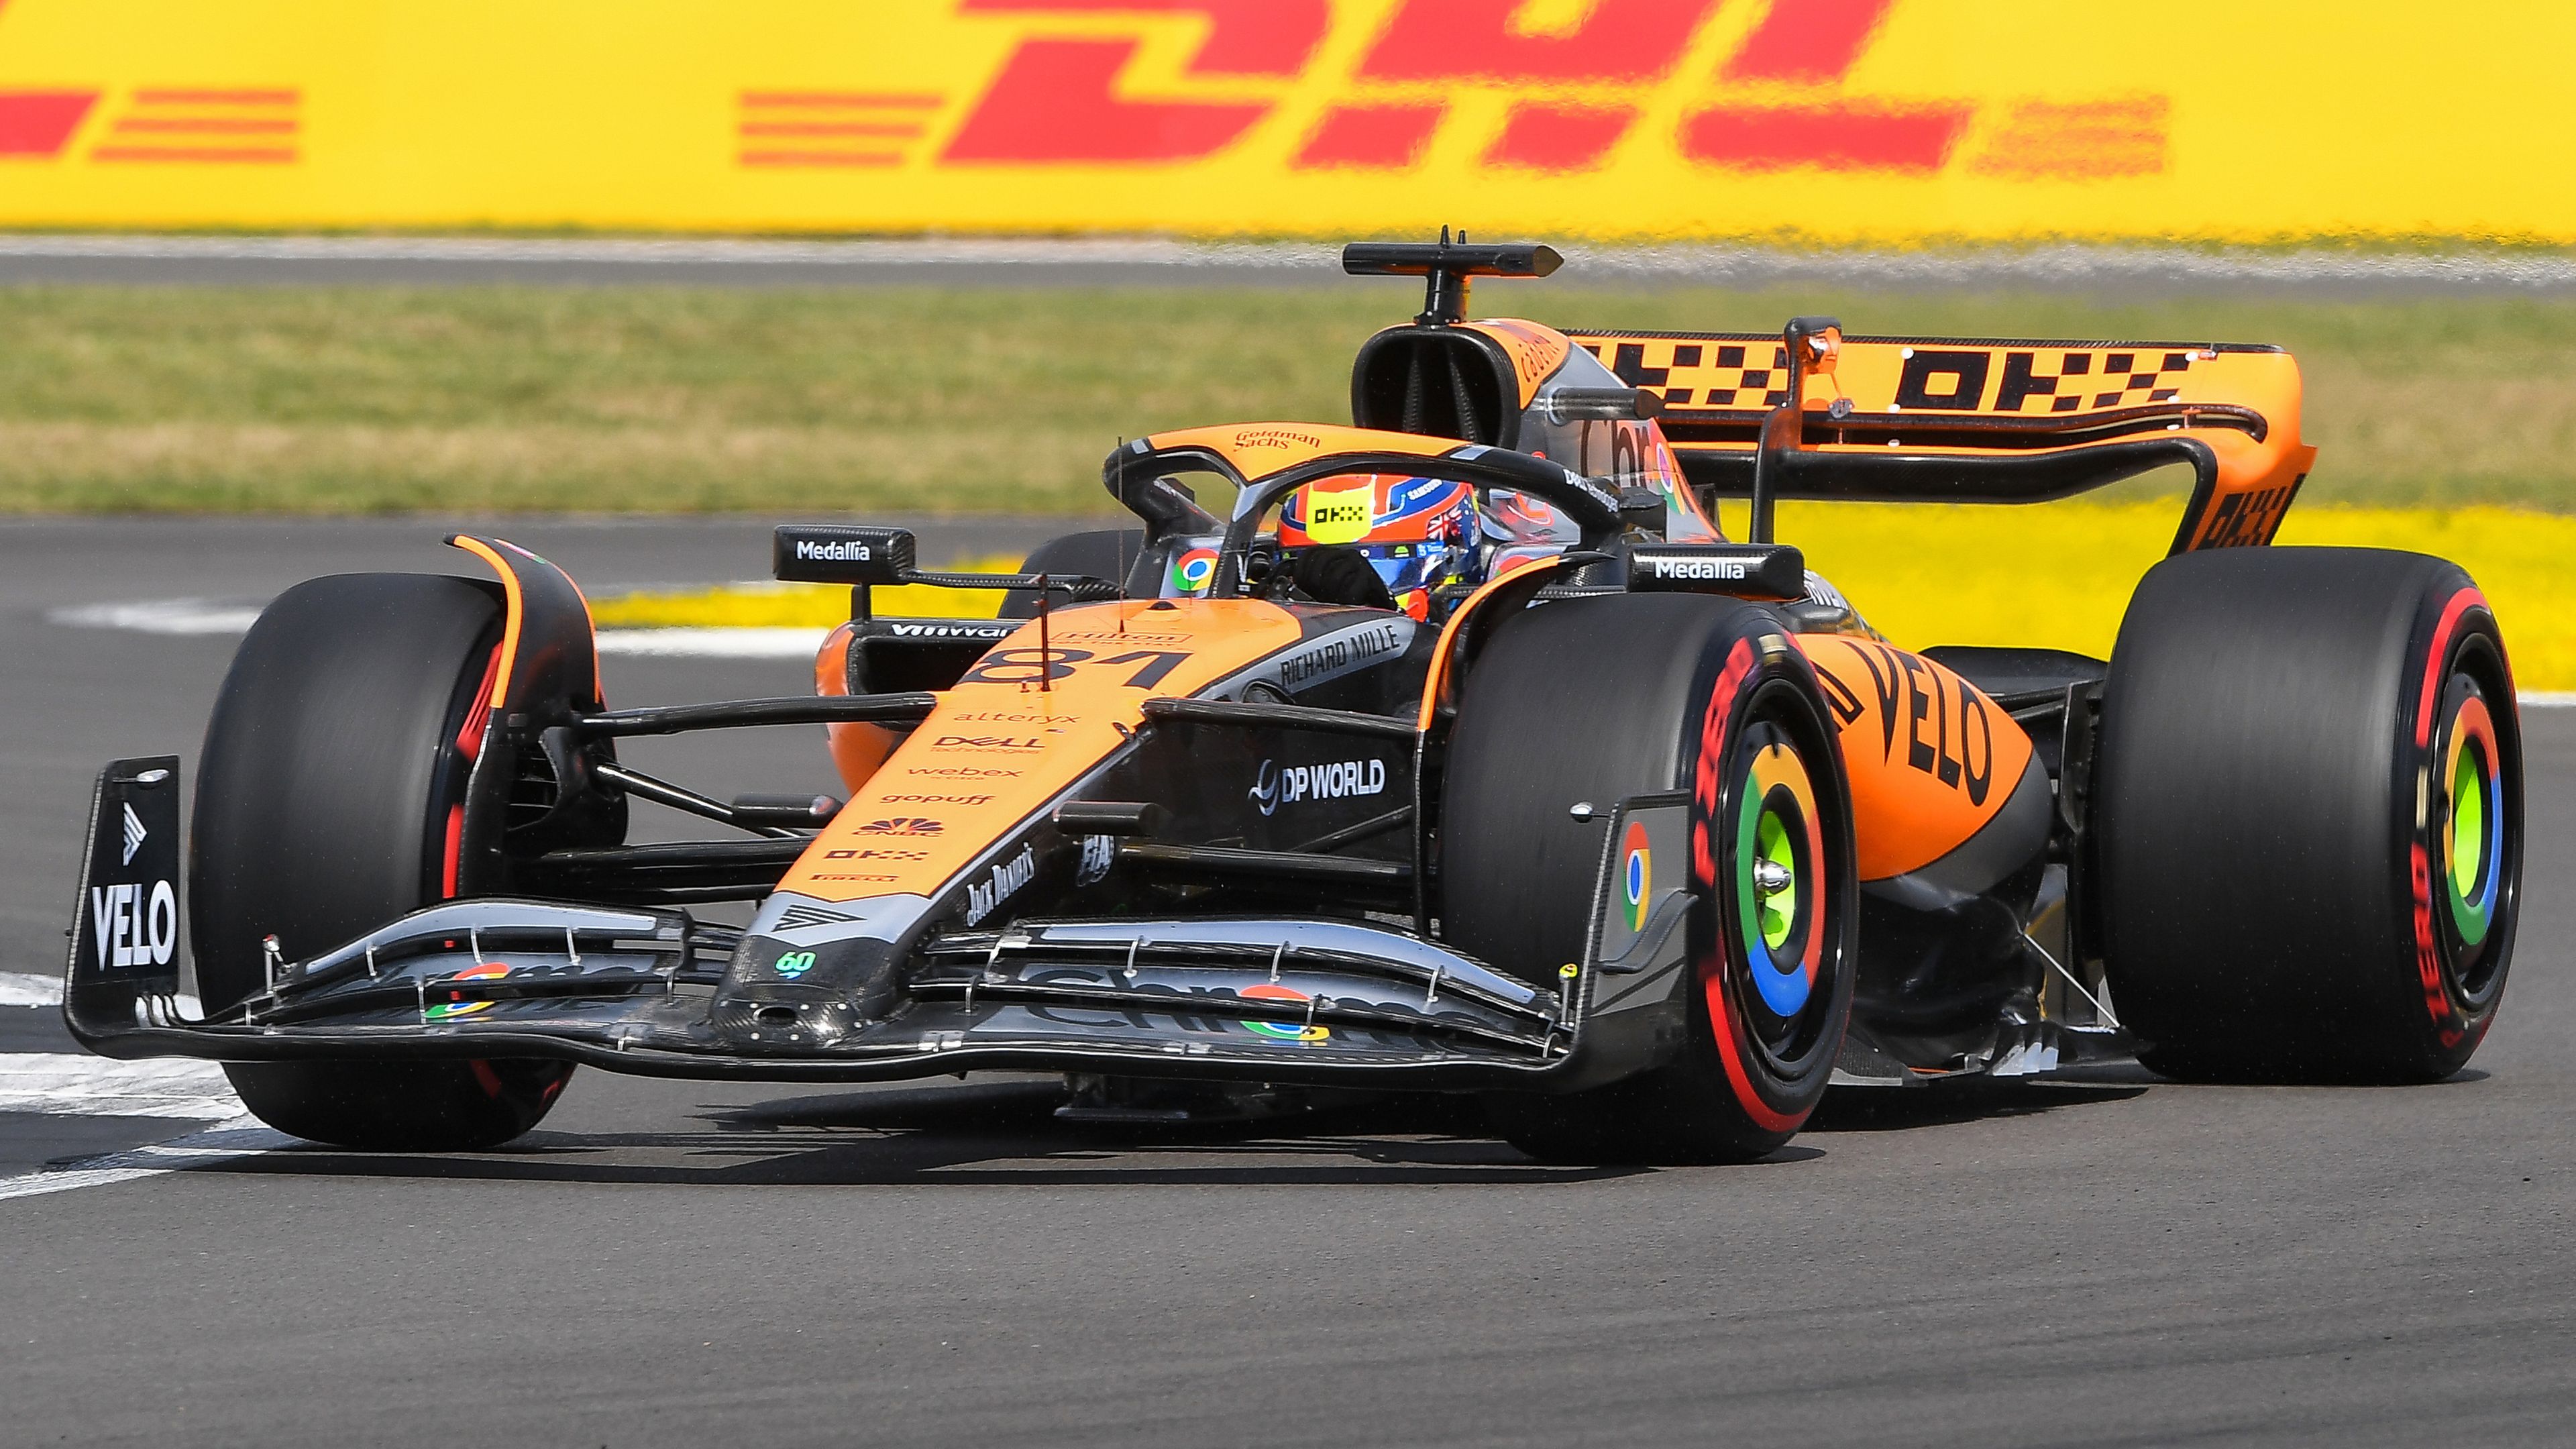 McLaren duo stun F1 with second and third in British Grand Prix qualifying, Max Verstappen on pole